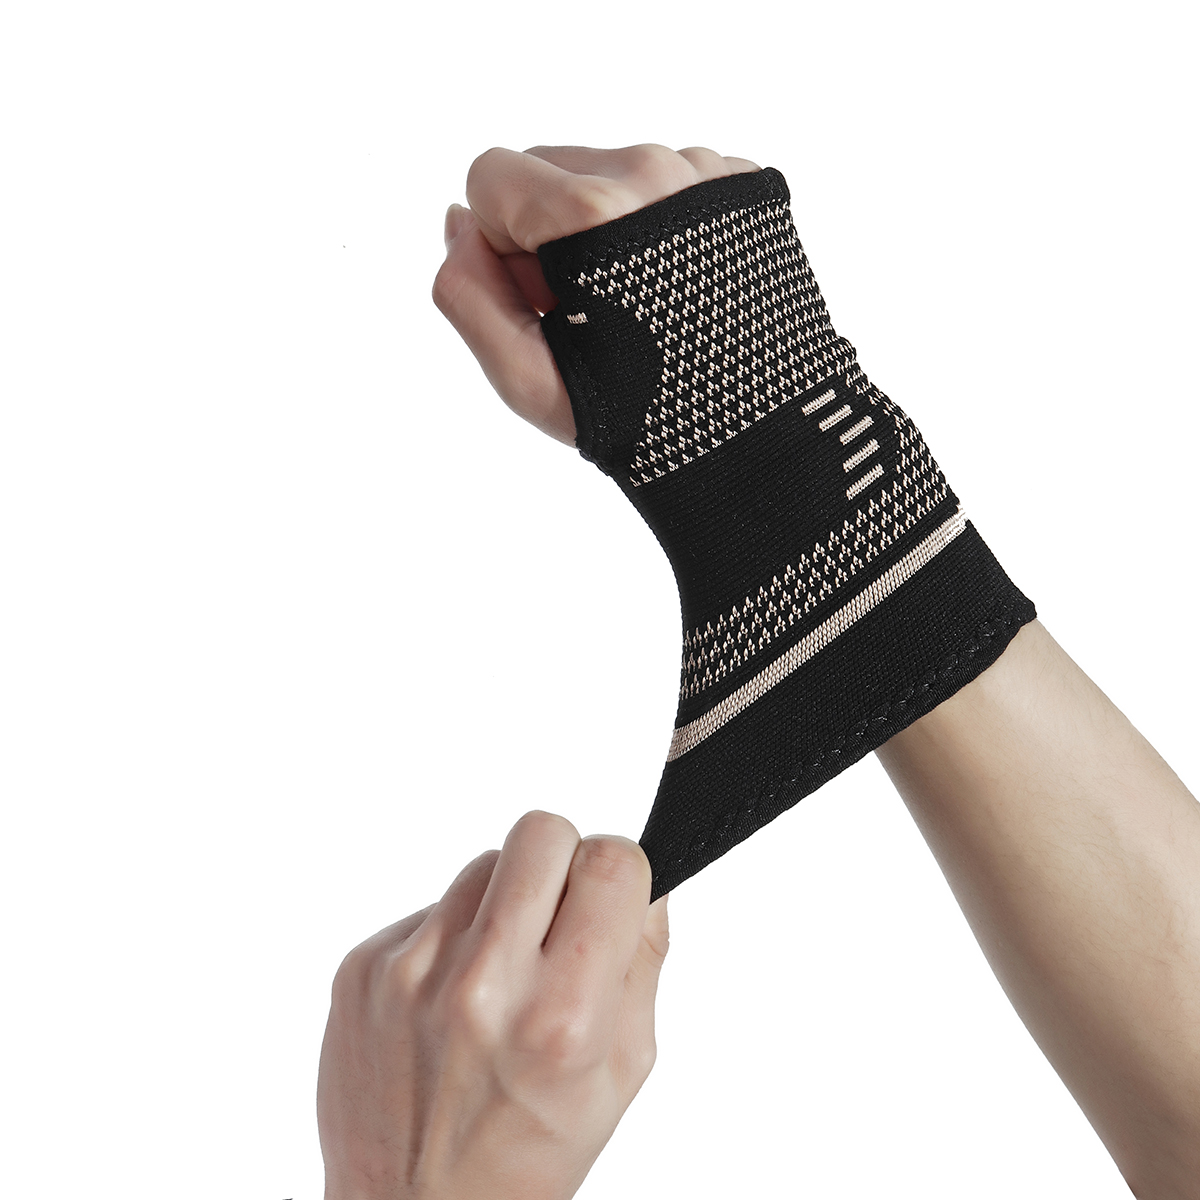 KALOAD-1PC-Copper-Infused-Wrist-Sleeve-Palm-Hand-Support-Outdoor-Sports-Bracer-Support-Fitness-Prote-1429972-5